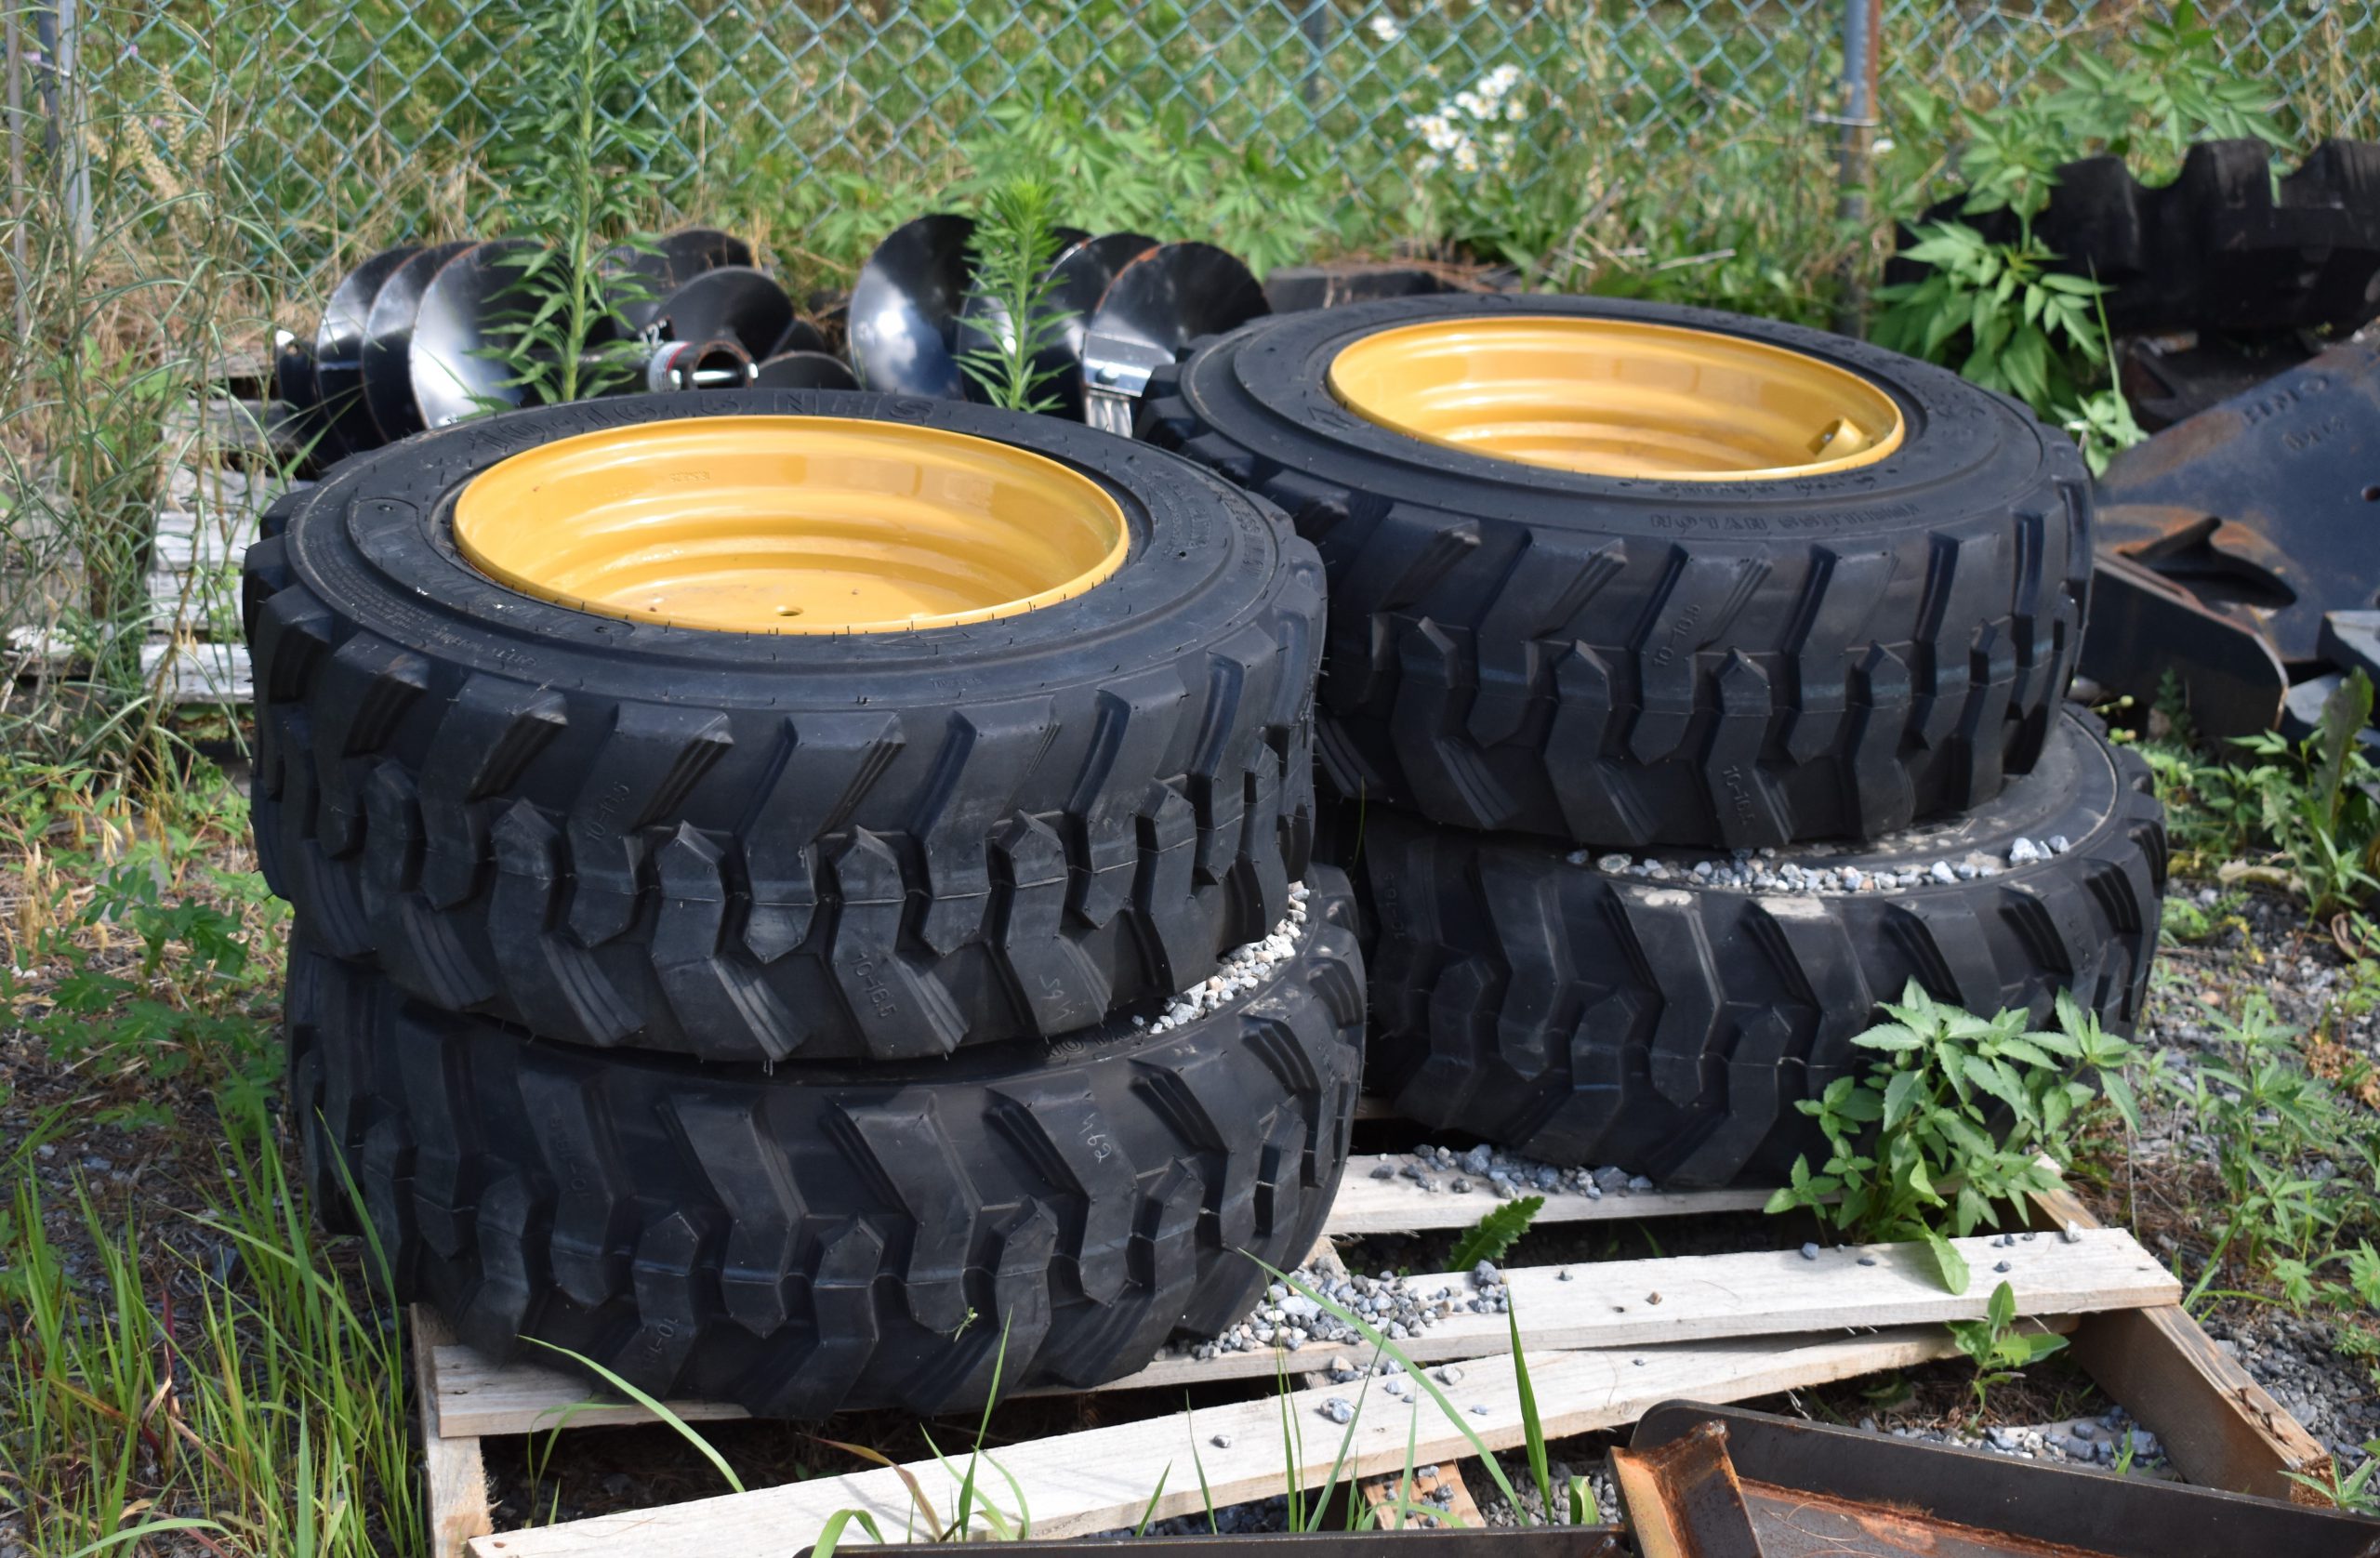 New Skid Steer Rims and Tires Image